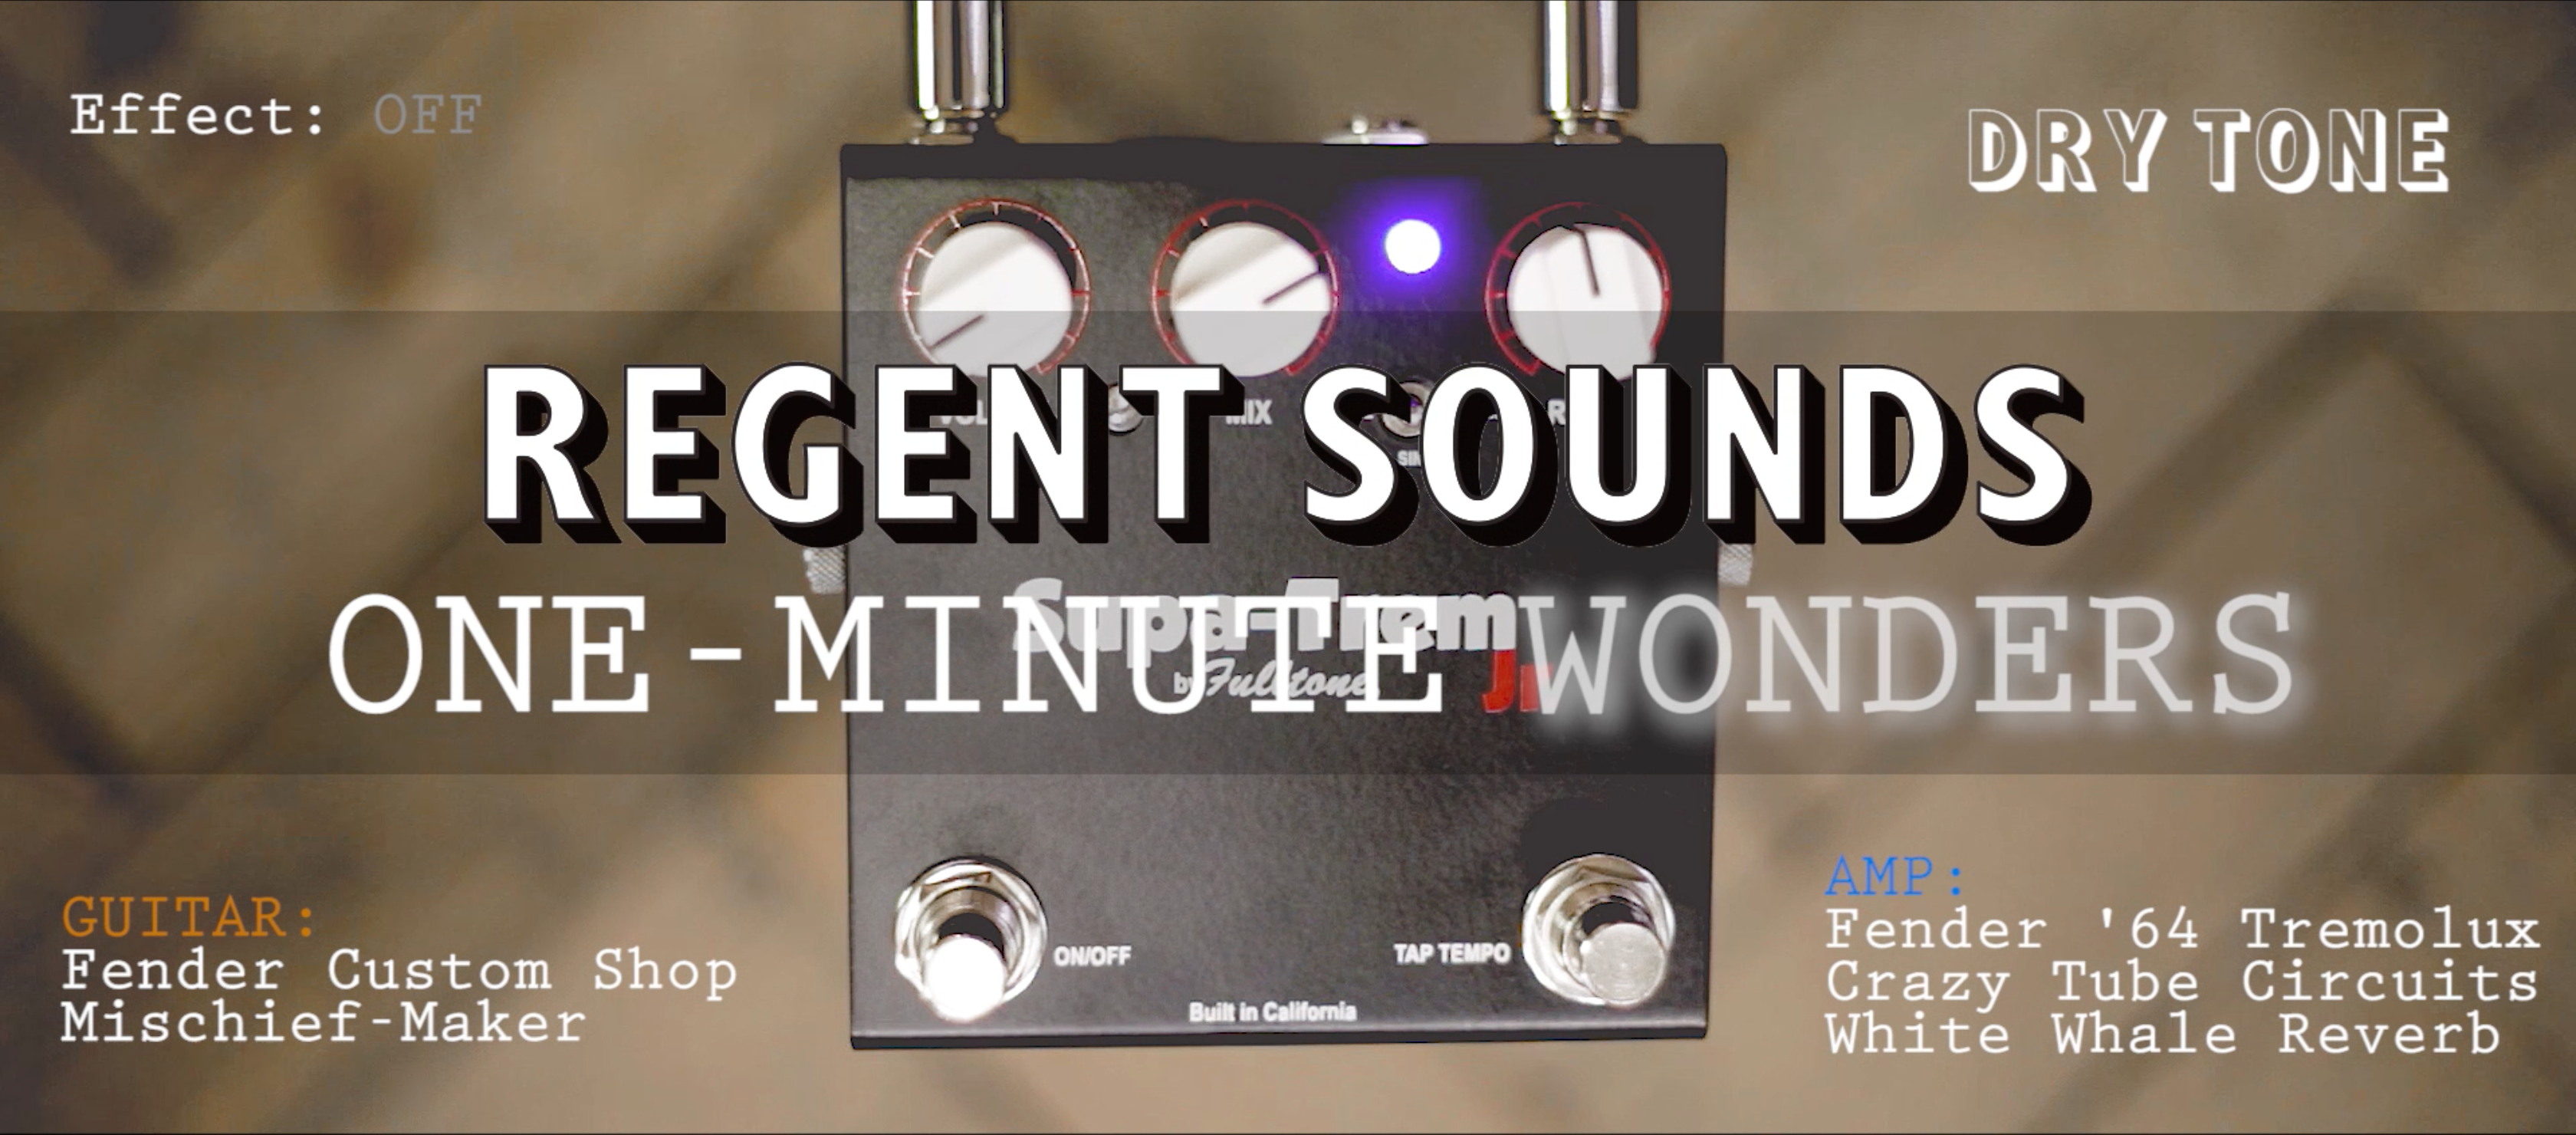 One-Minute Wonders – Our New 60-Second YouTube Series